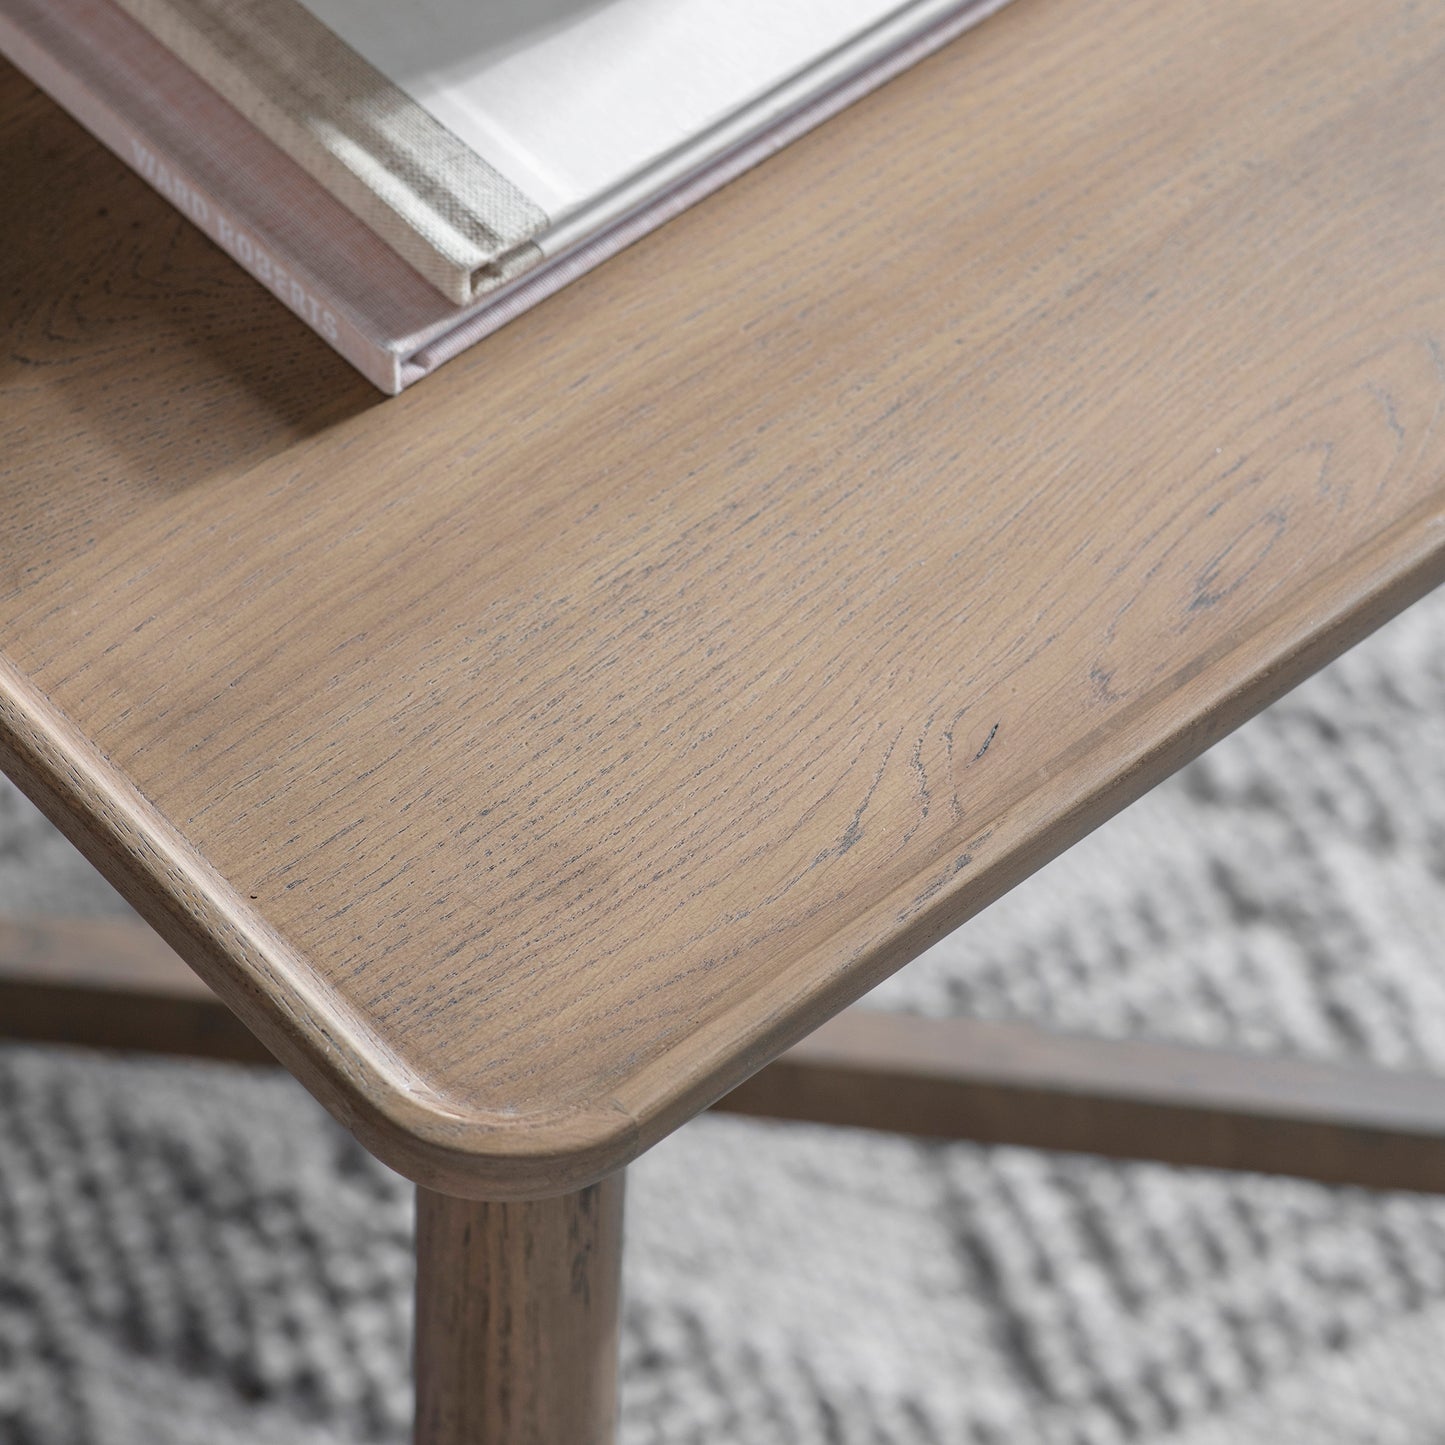 A close up of a Wembury Side Table, a home furniture piece from Kikiathome.co.uk, with a book on it.